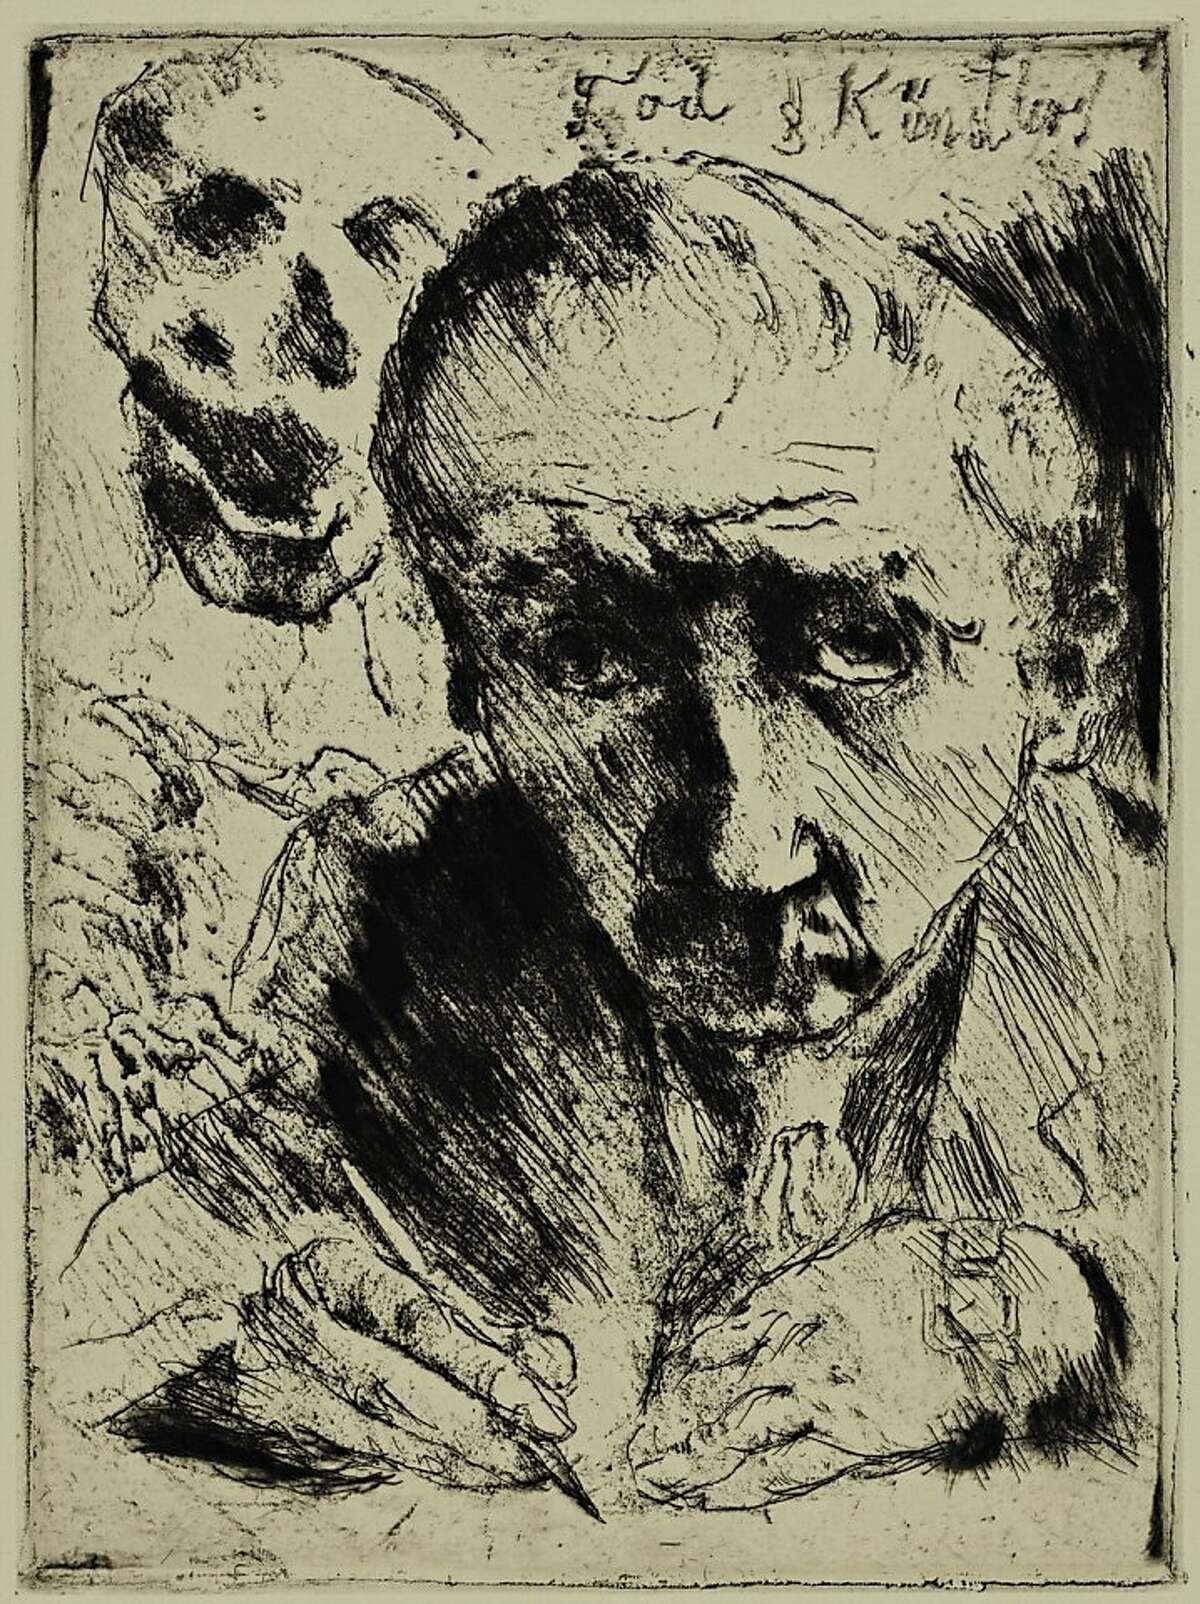 Lovis Corinth's "Death and the Artist," 1921, part of the new show at Cantor Arts Center